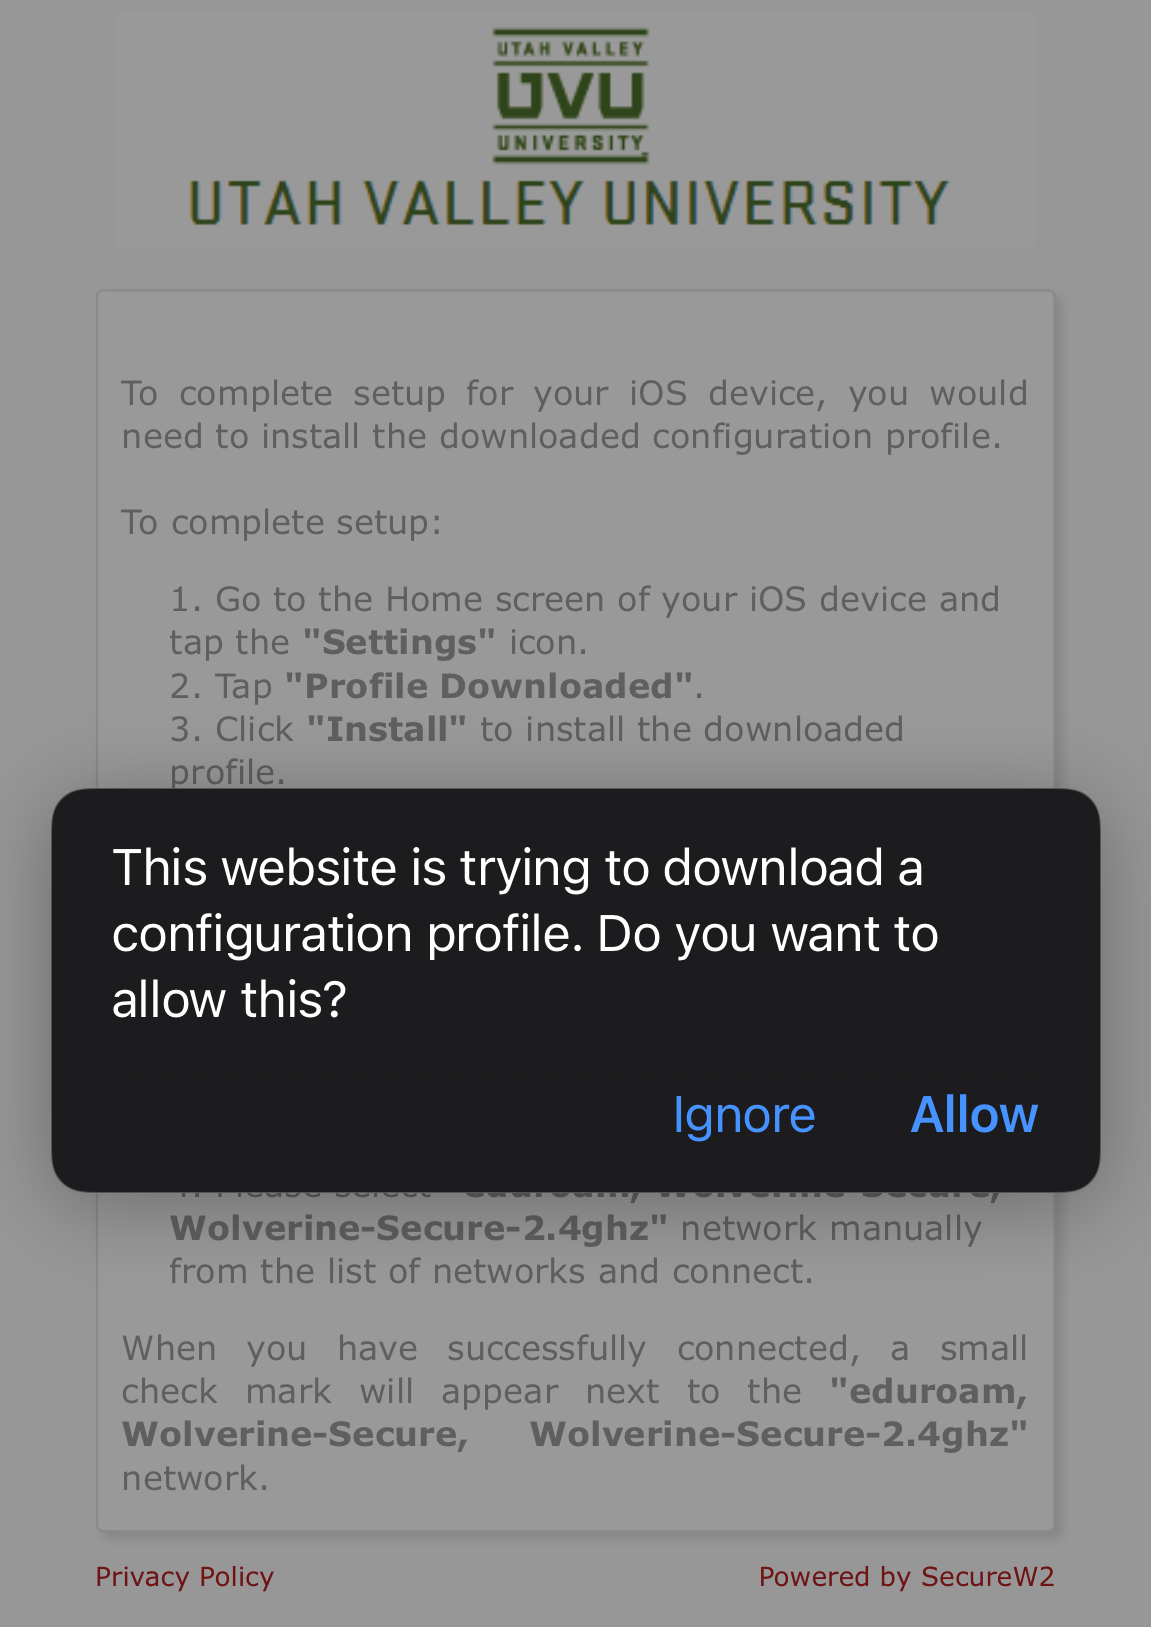 Approve the download the configuration profile.